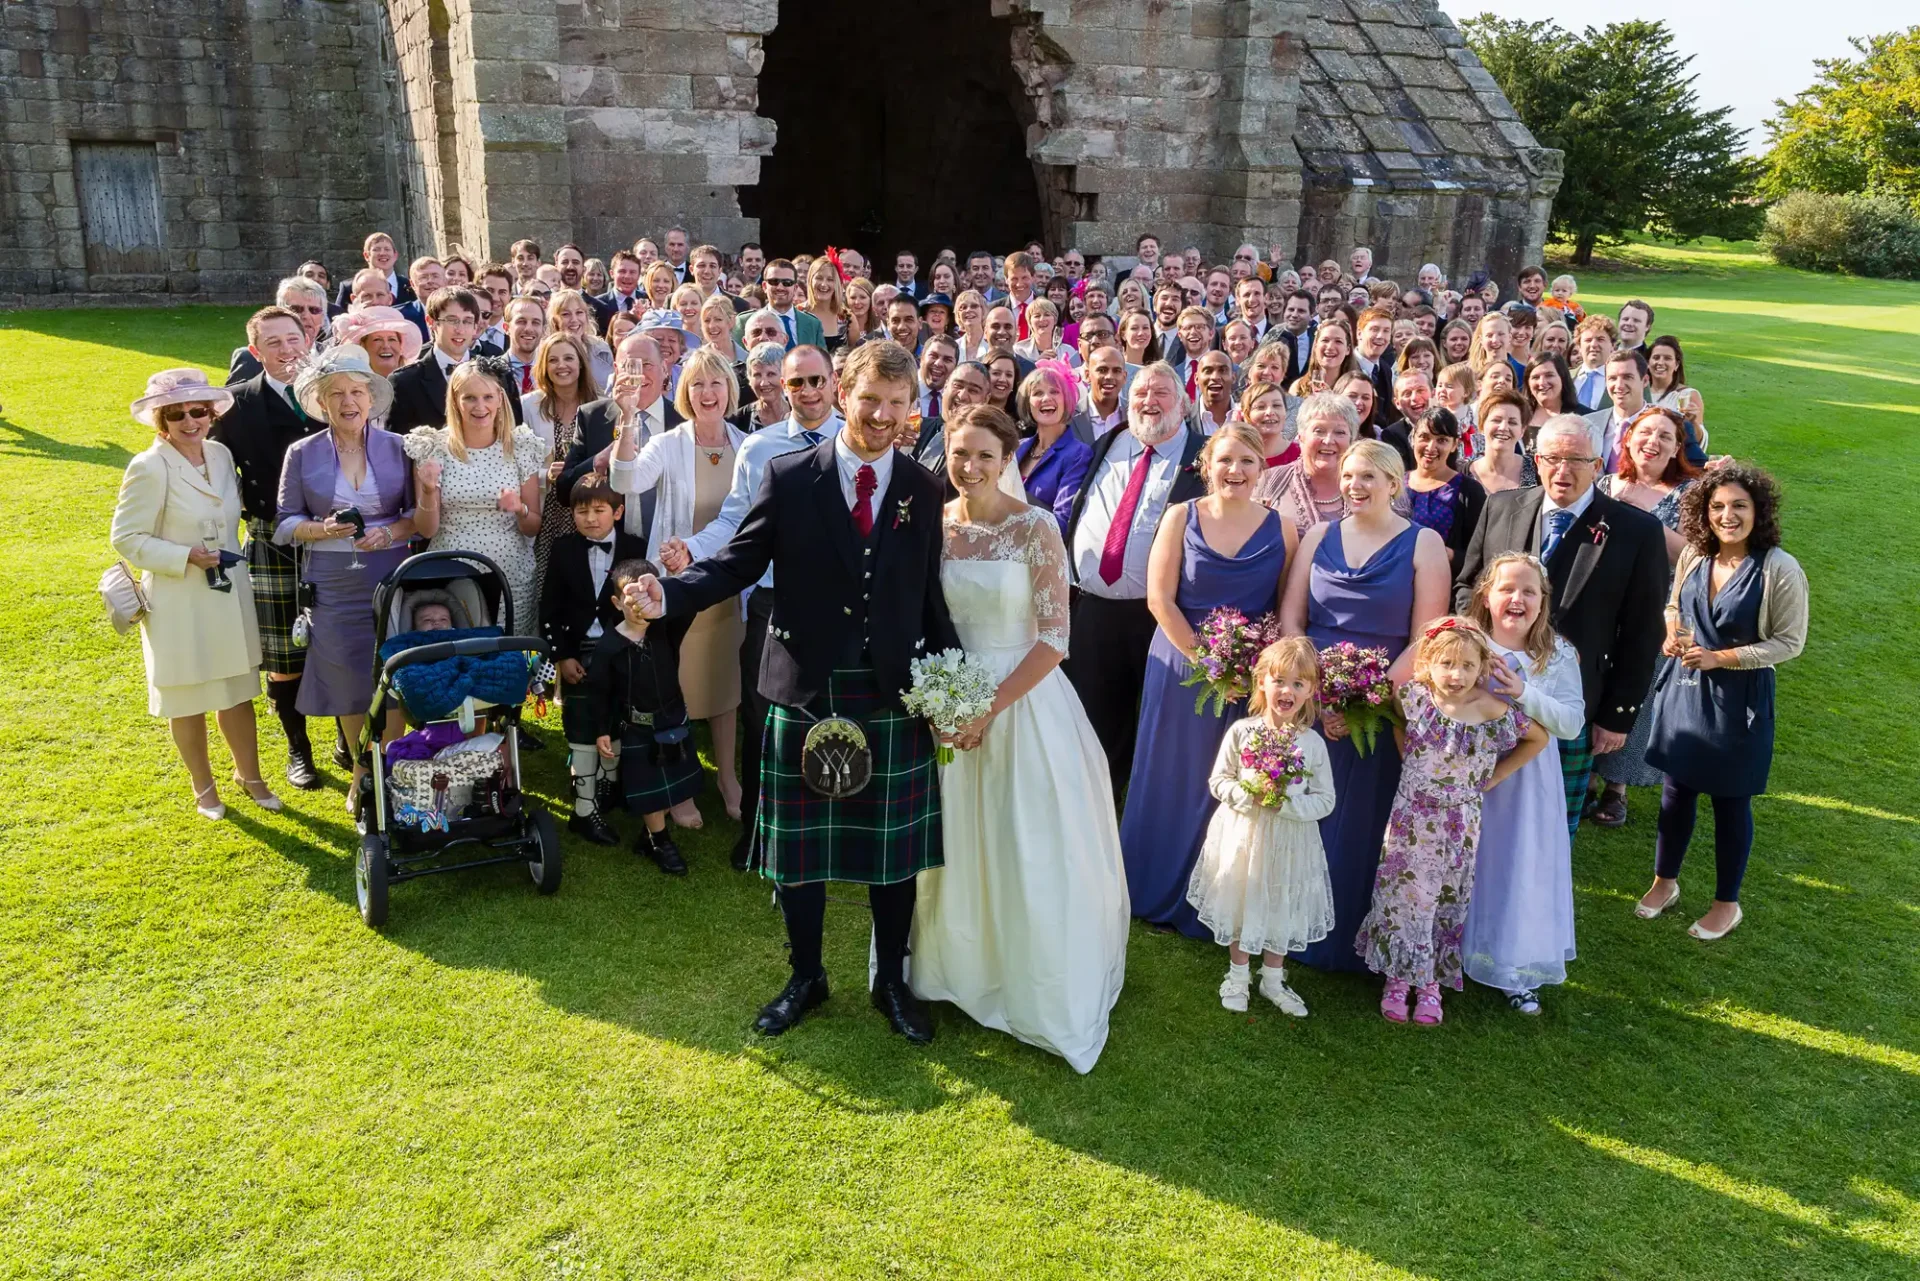 A large wedding group photo on a sunny day, featuring a bride and groom in the center, surrounded by guests in formal attire.